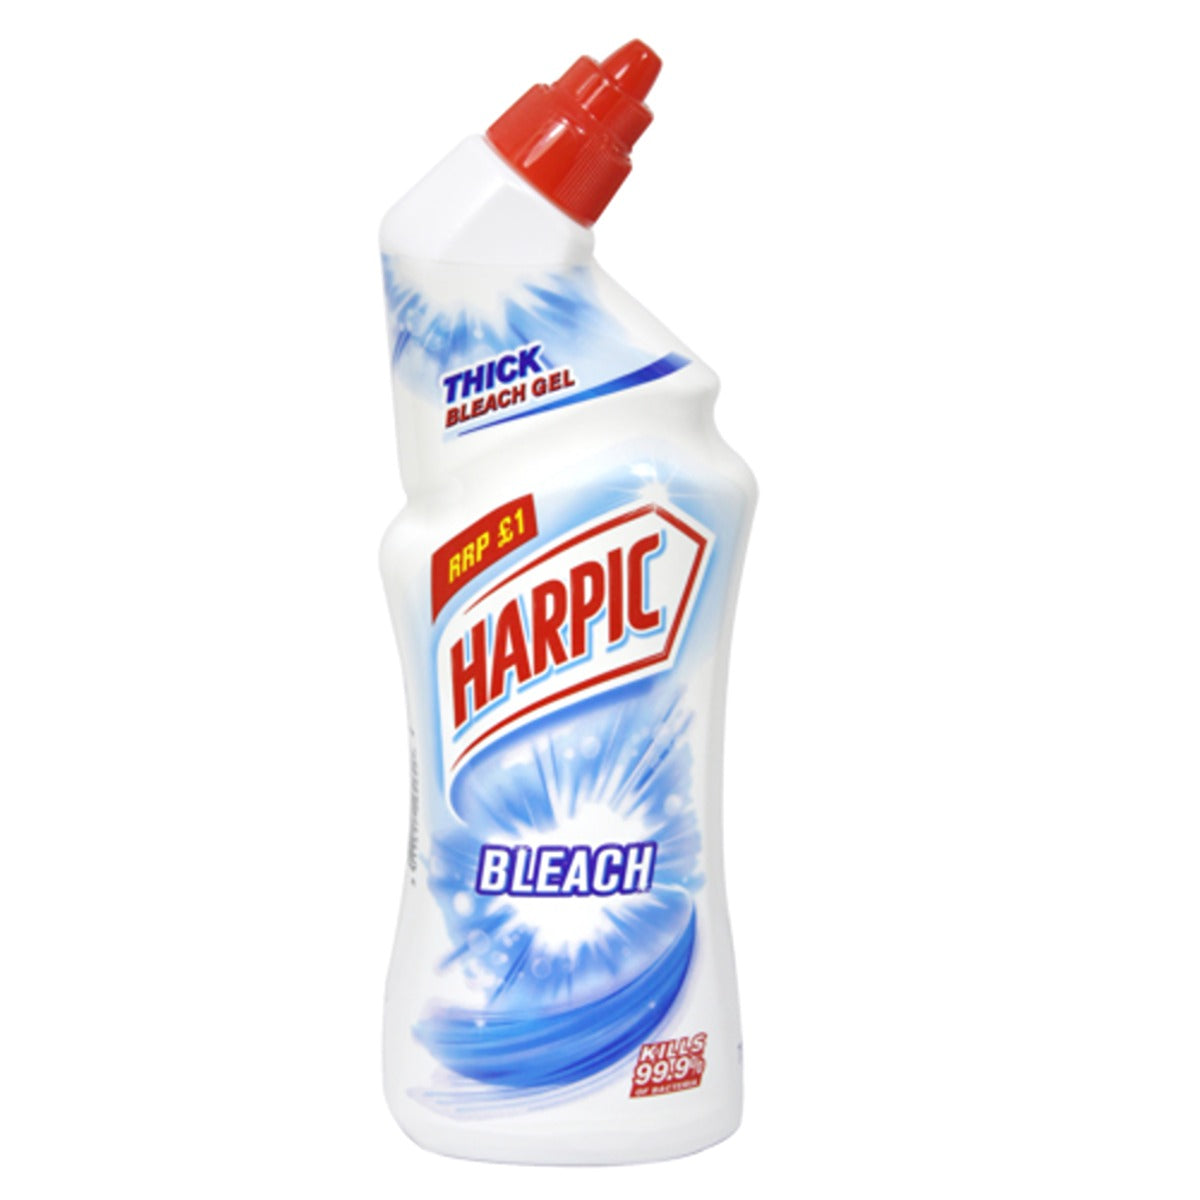 A bottle of Harpic - Bleach White and Shine Original - 750 ml on a white background.